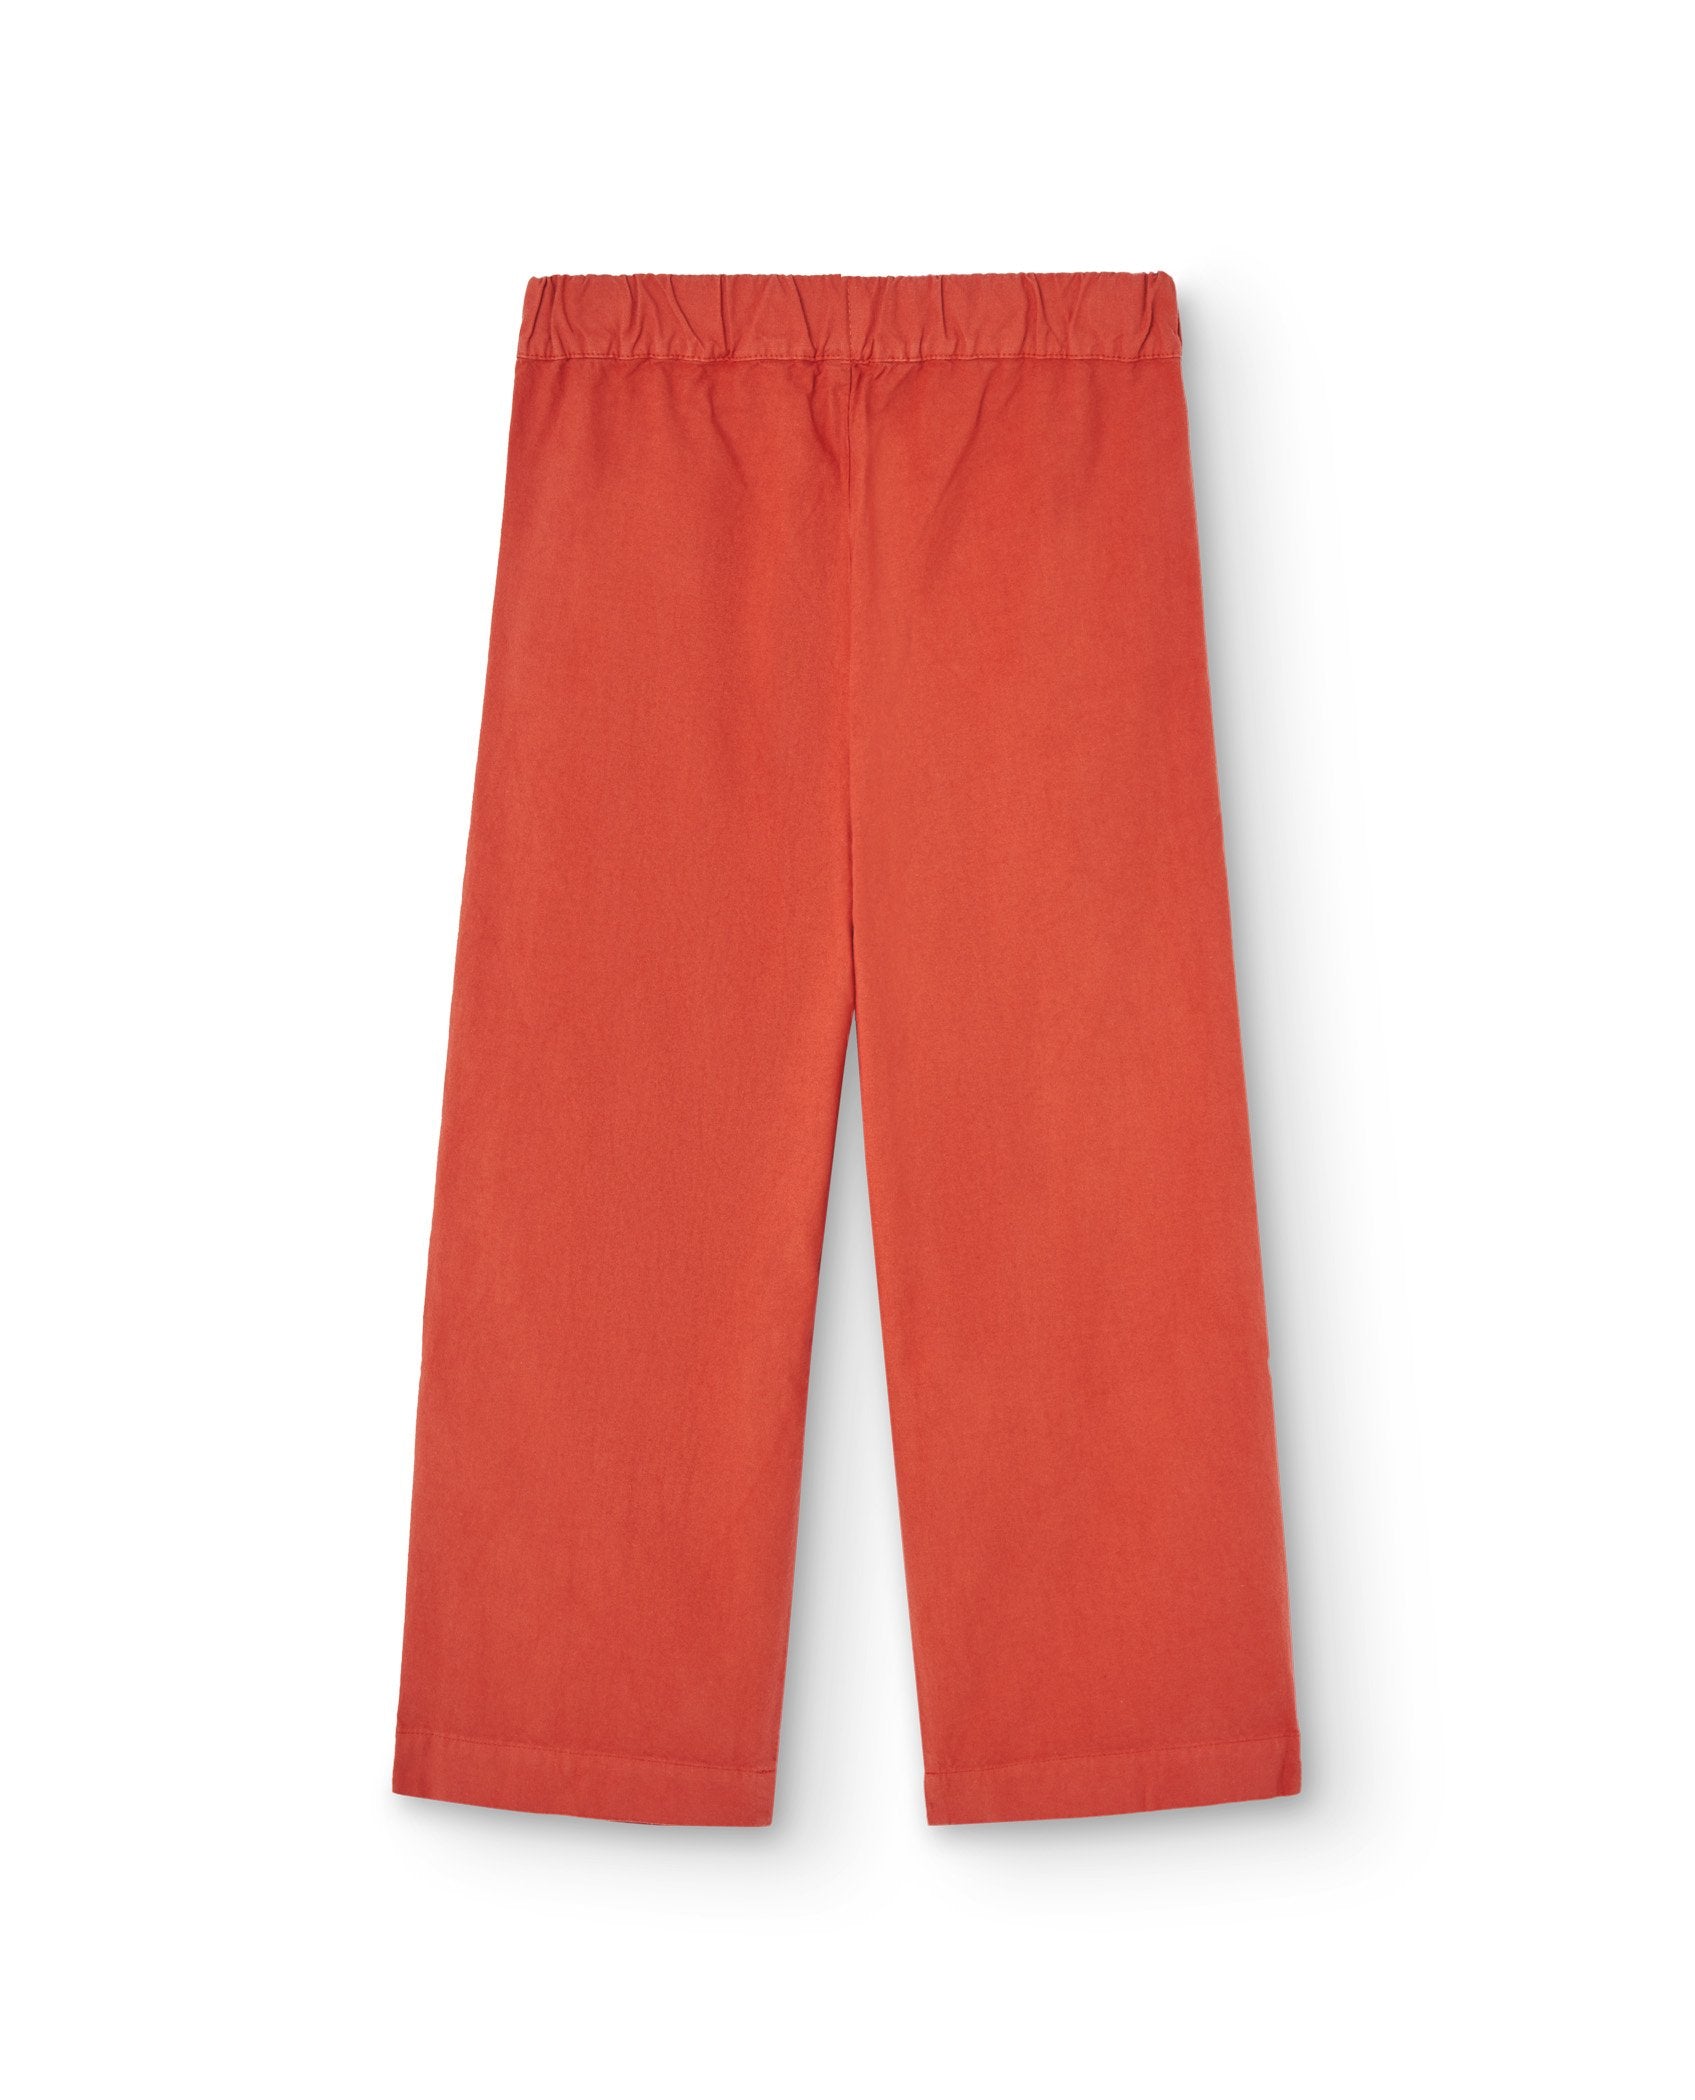 Red Elephant Pants PRODUCT BACK